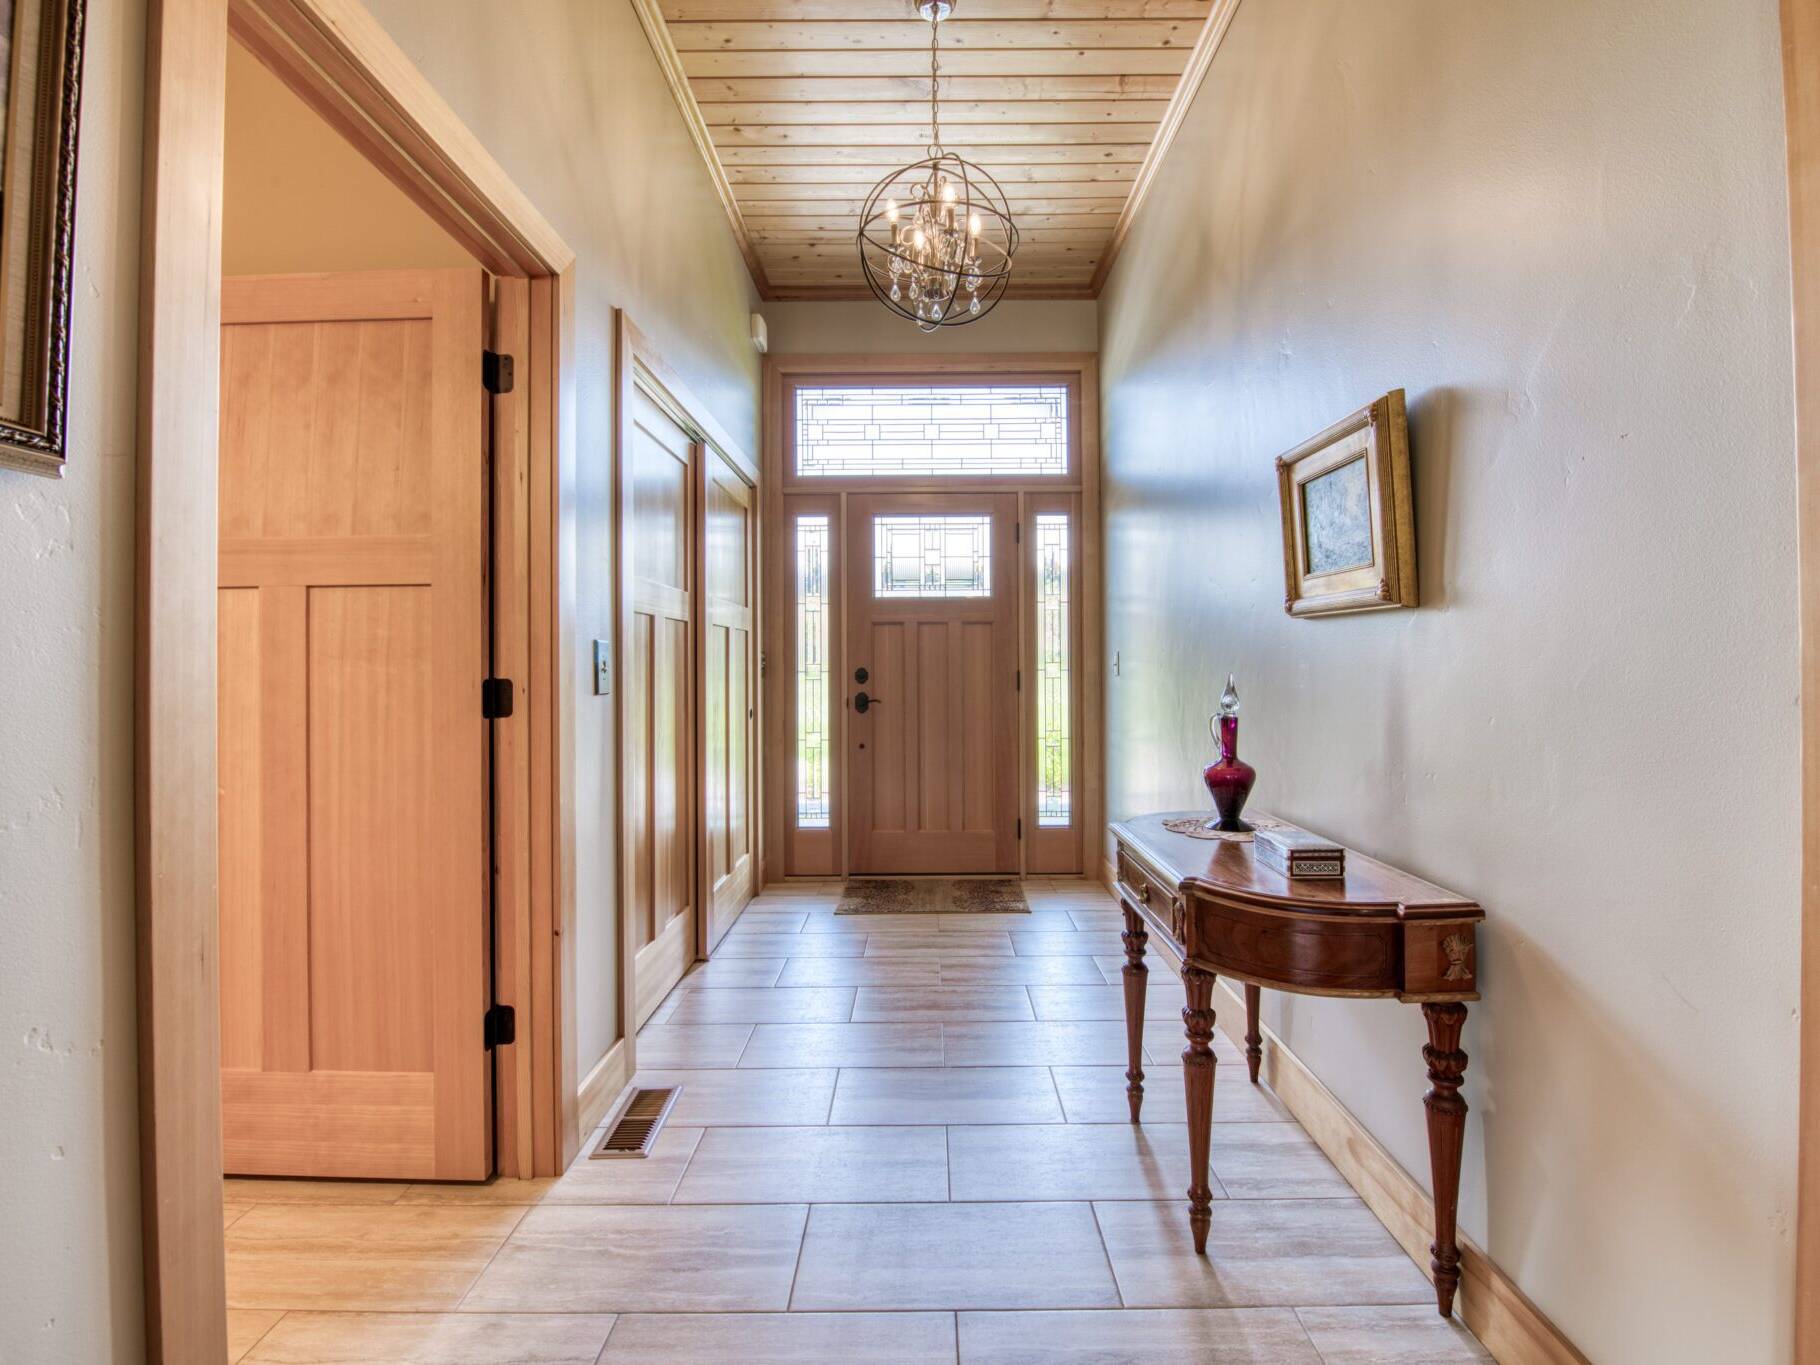 Entry foyer with tile floors, wood ceiling, trim and doors in a custom home by Big Sky Builders in Hamilton, MT.